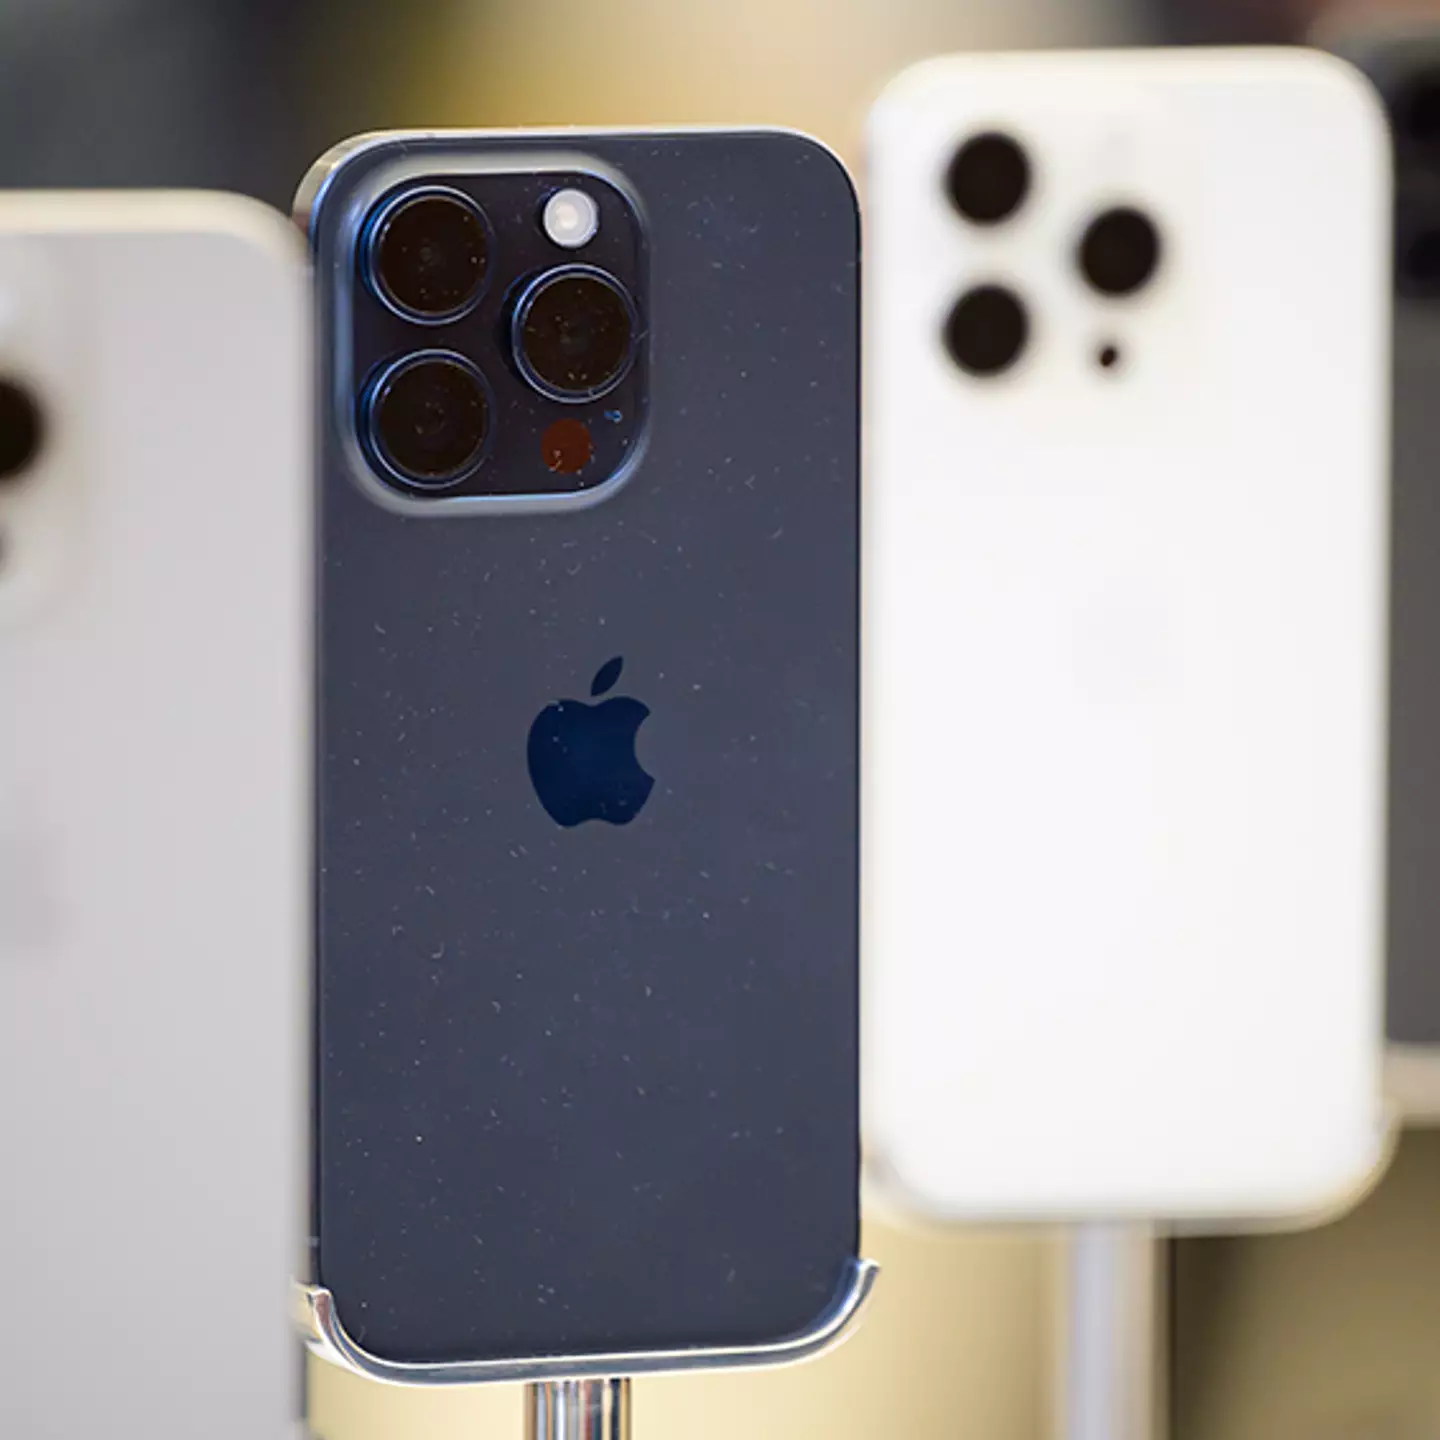 If your iPhone is on this list it could be worth a lot more than you thought